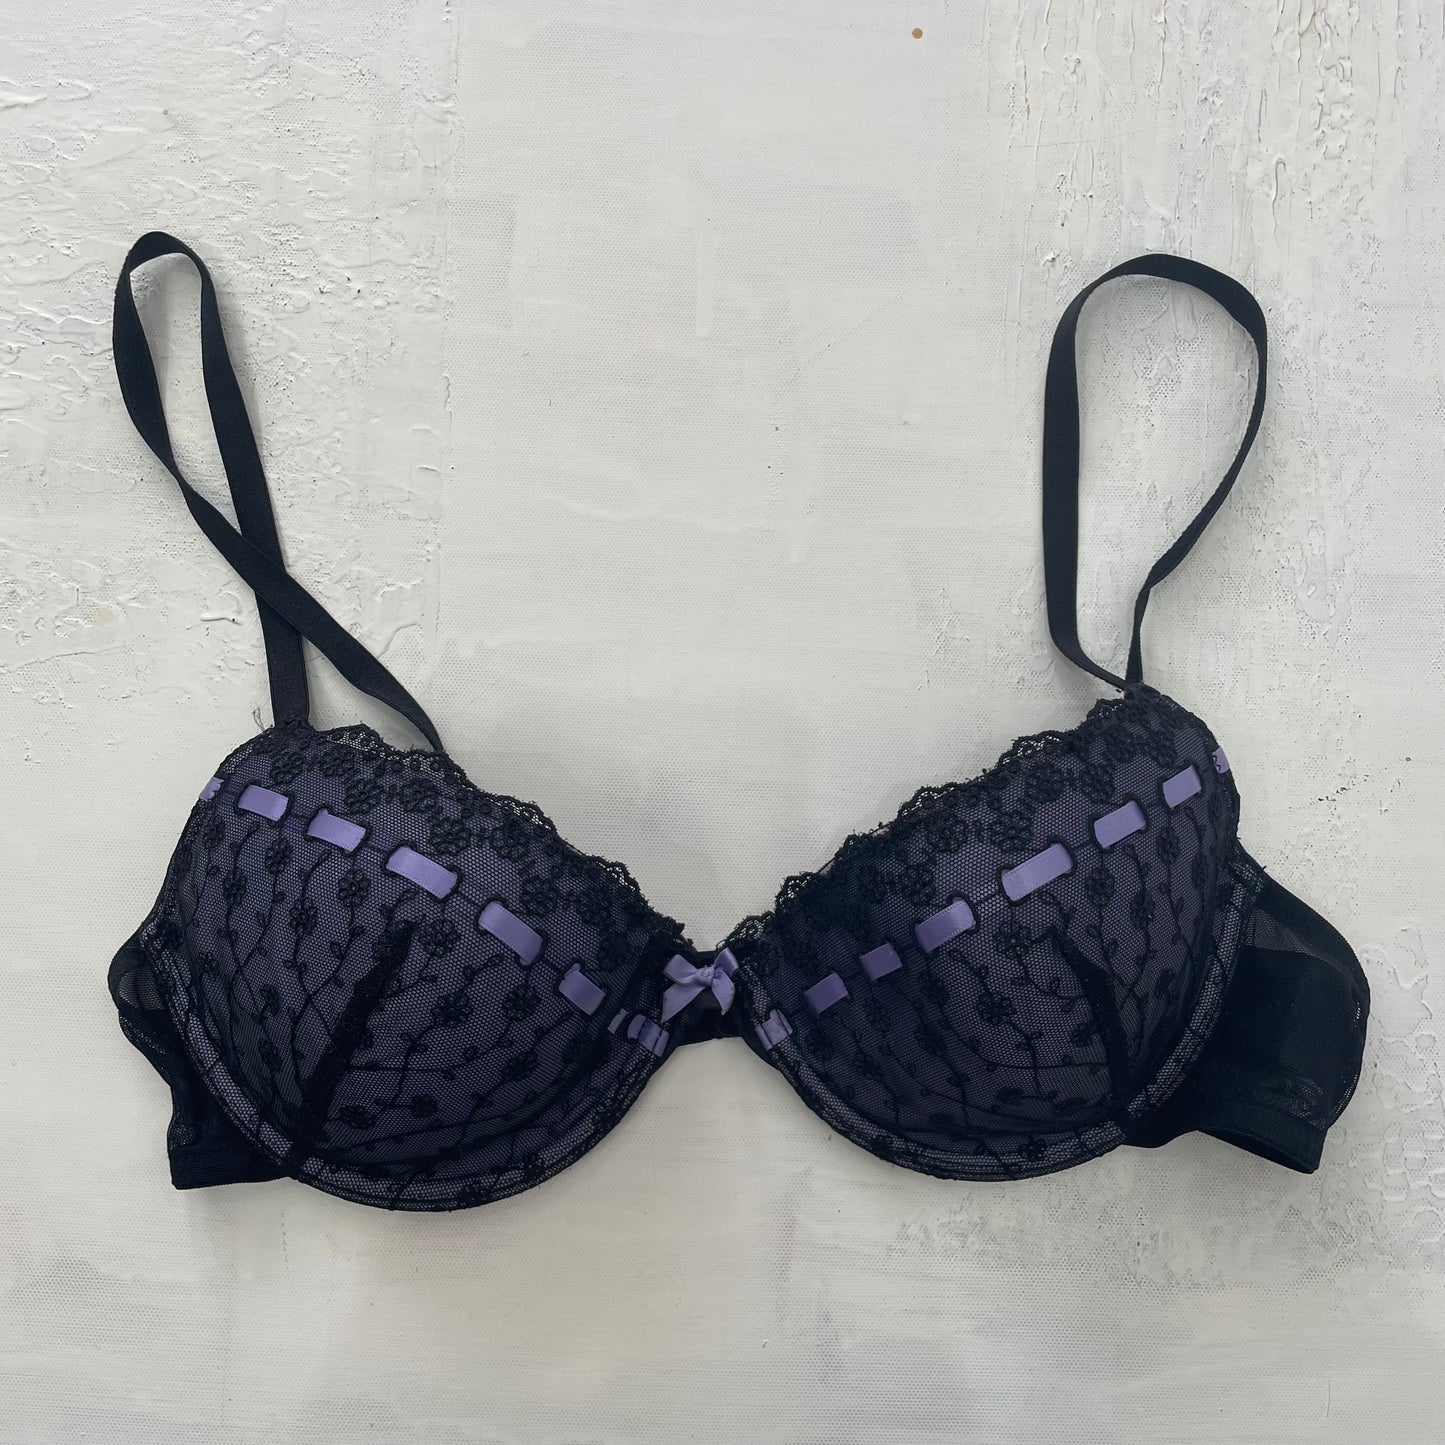 GRUNGE COQUETTE DROP | small black/purple padded bra with embroidery and ribbon detail